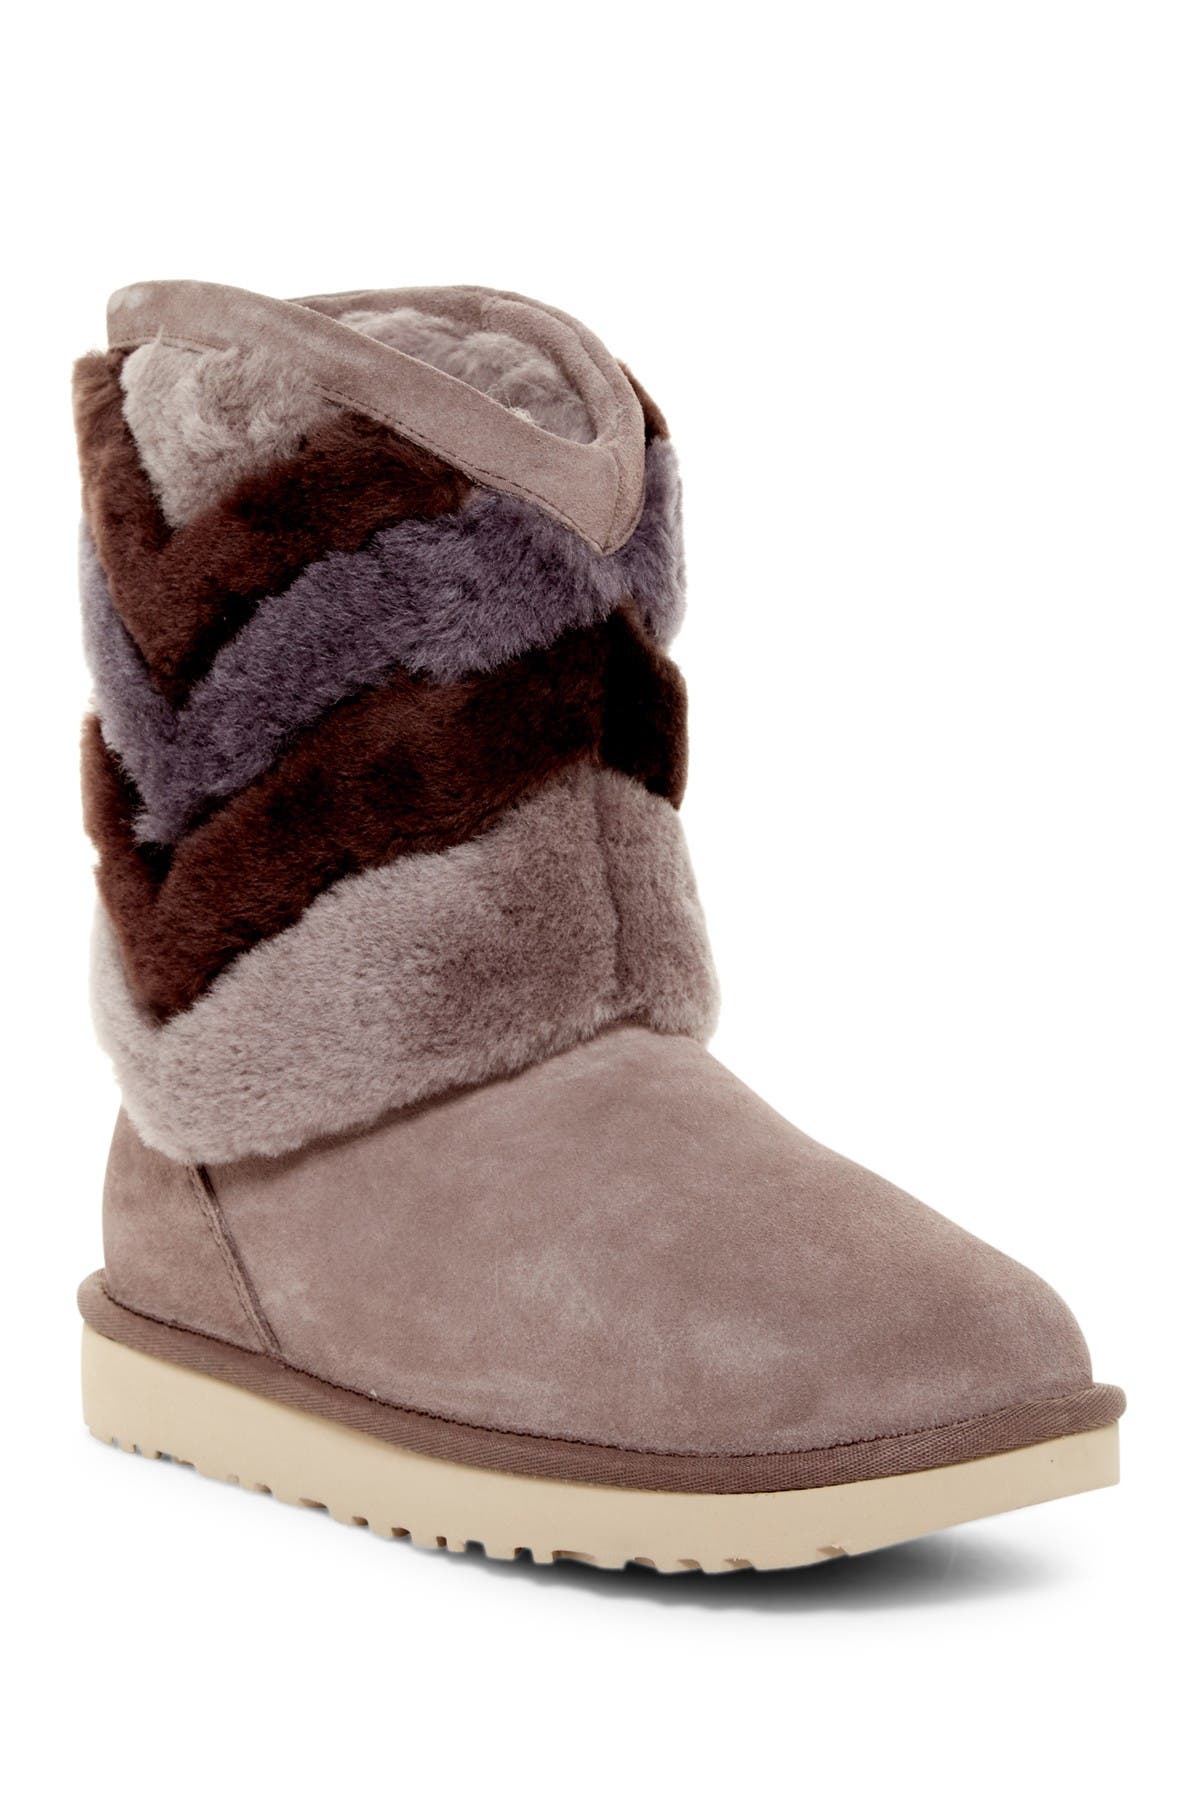 Selling \u003e hautelook uggs with A Reserve 